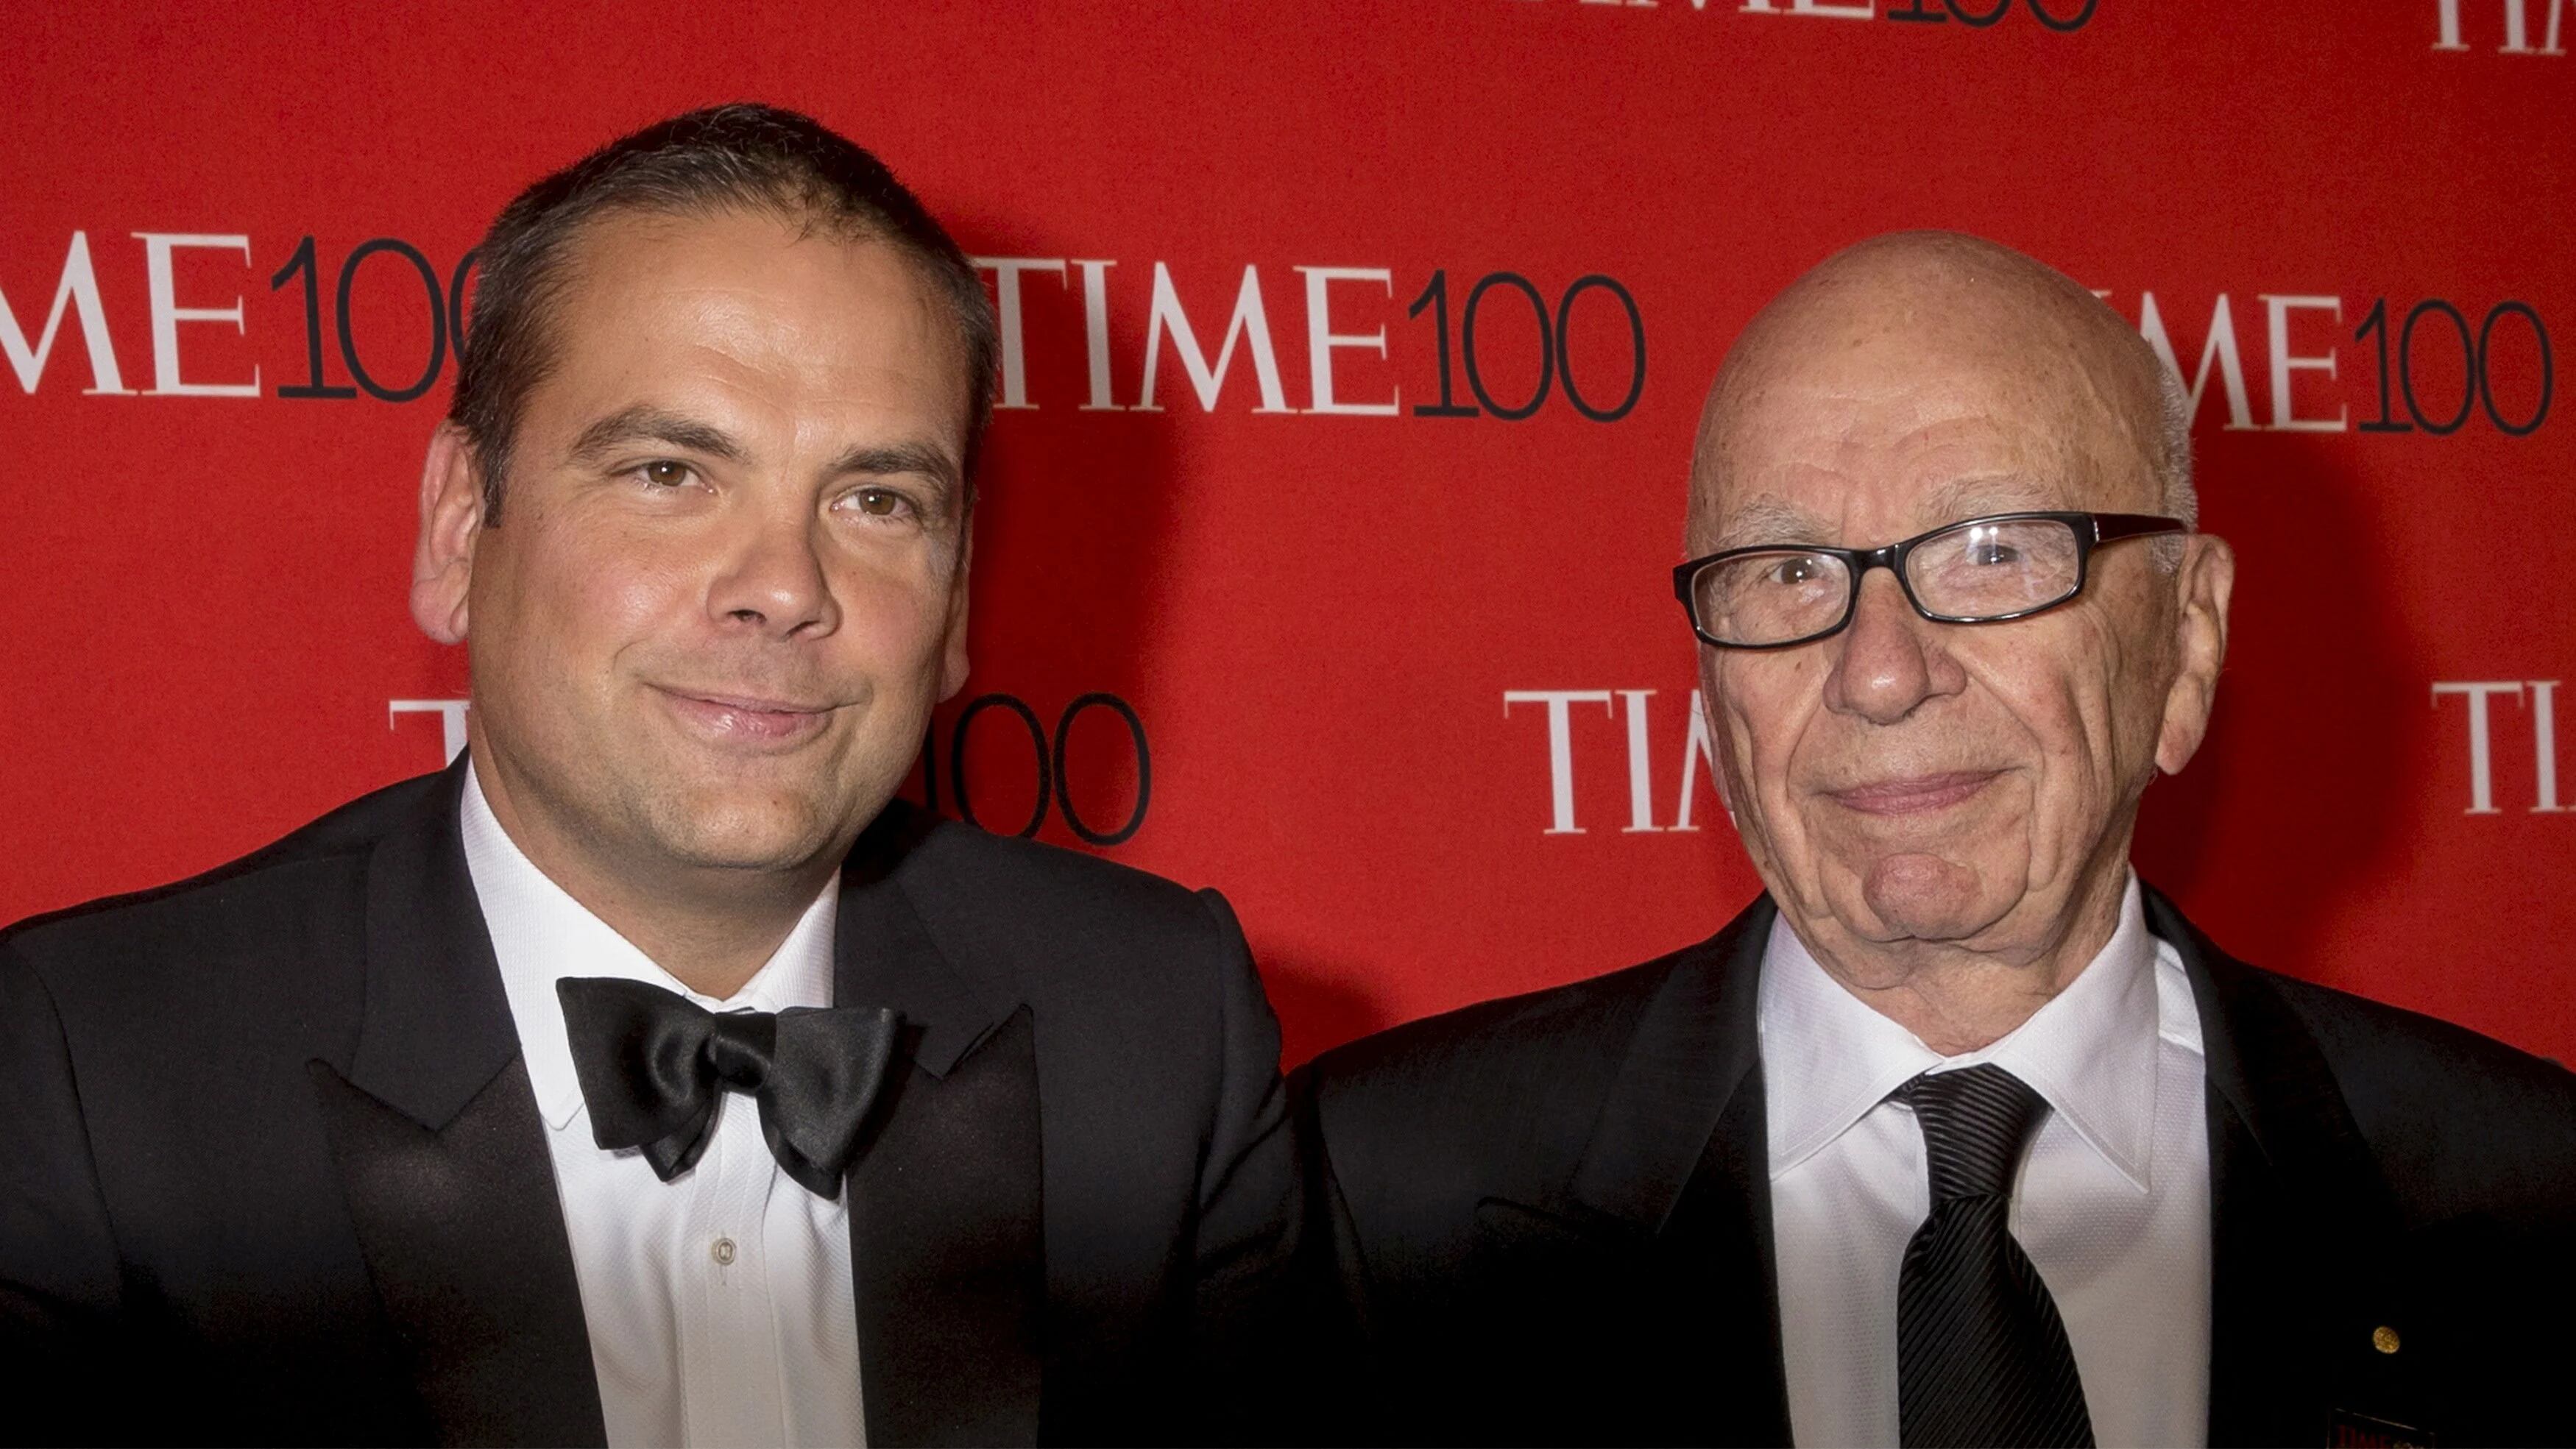 FILE PHOTO: Rupert Murdoch and Lachlan Murdoch arrive for the TIME 100 Gala in New York